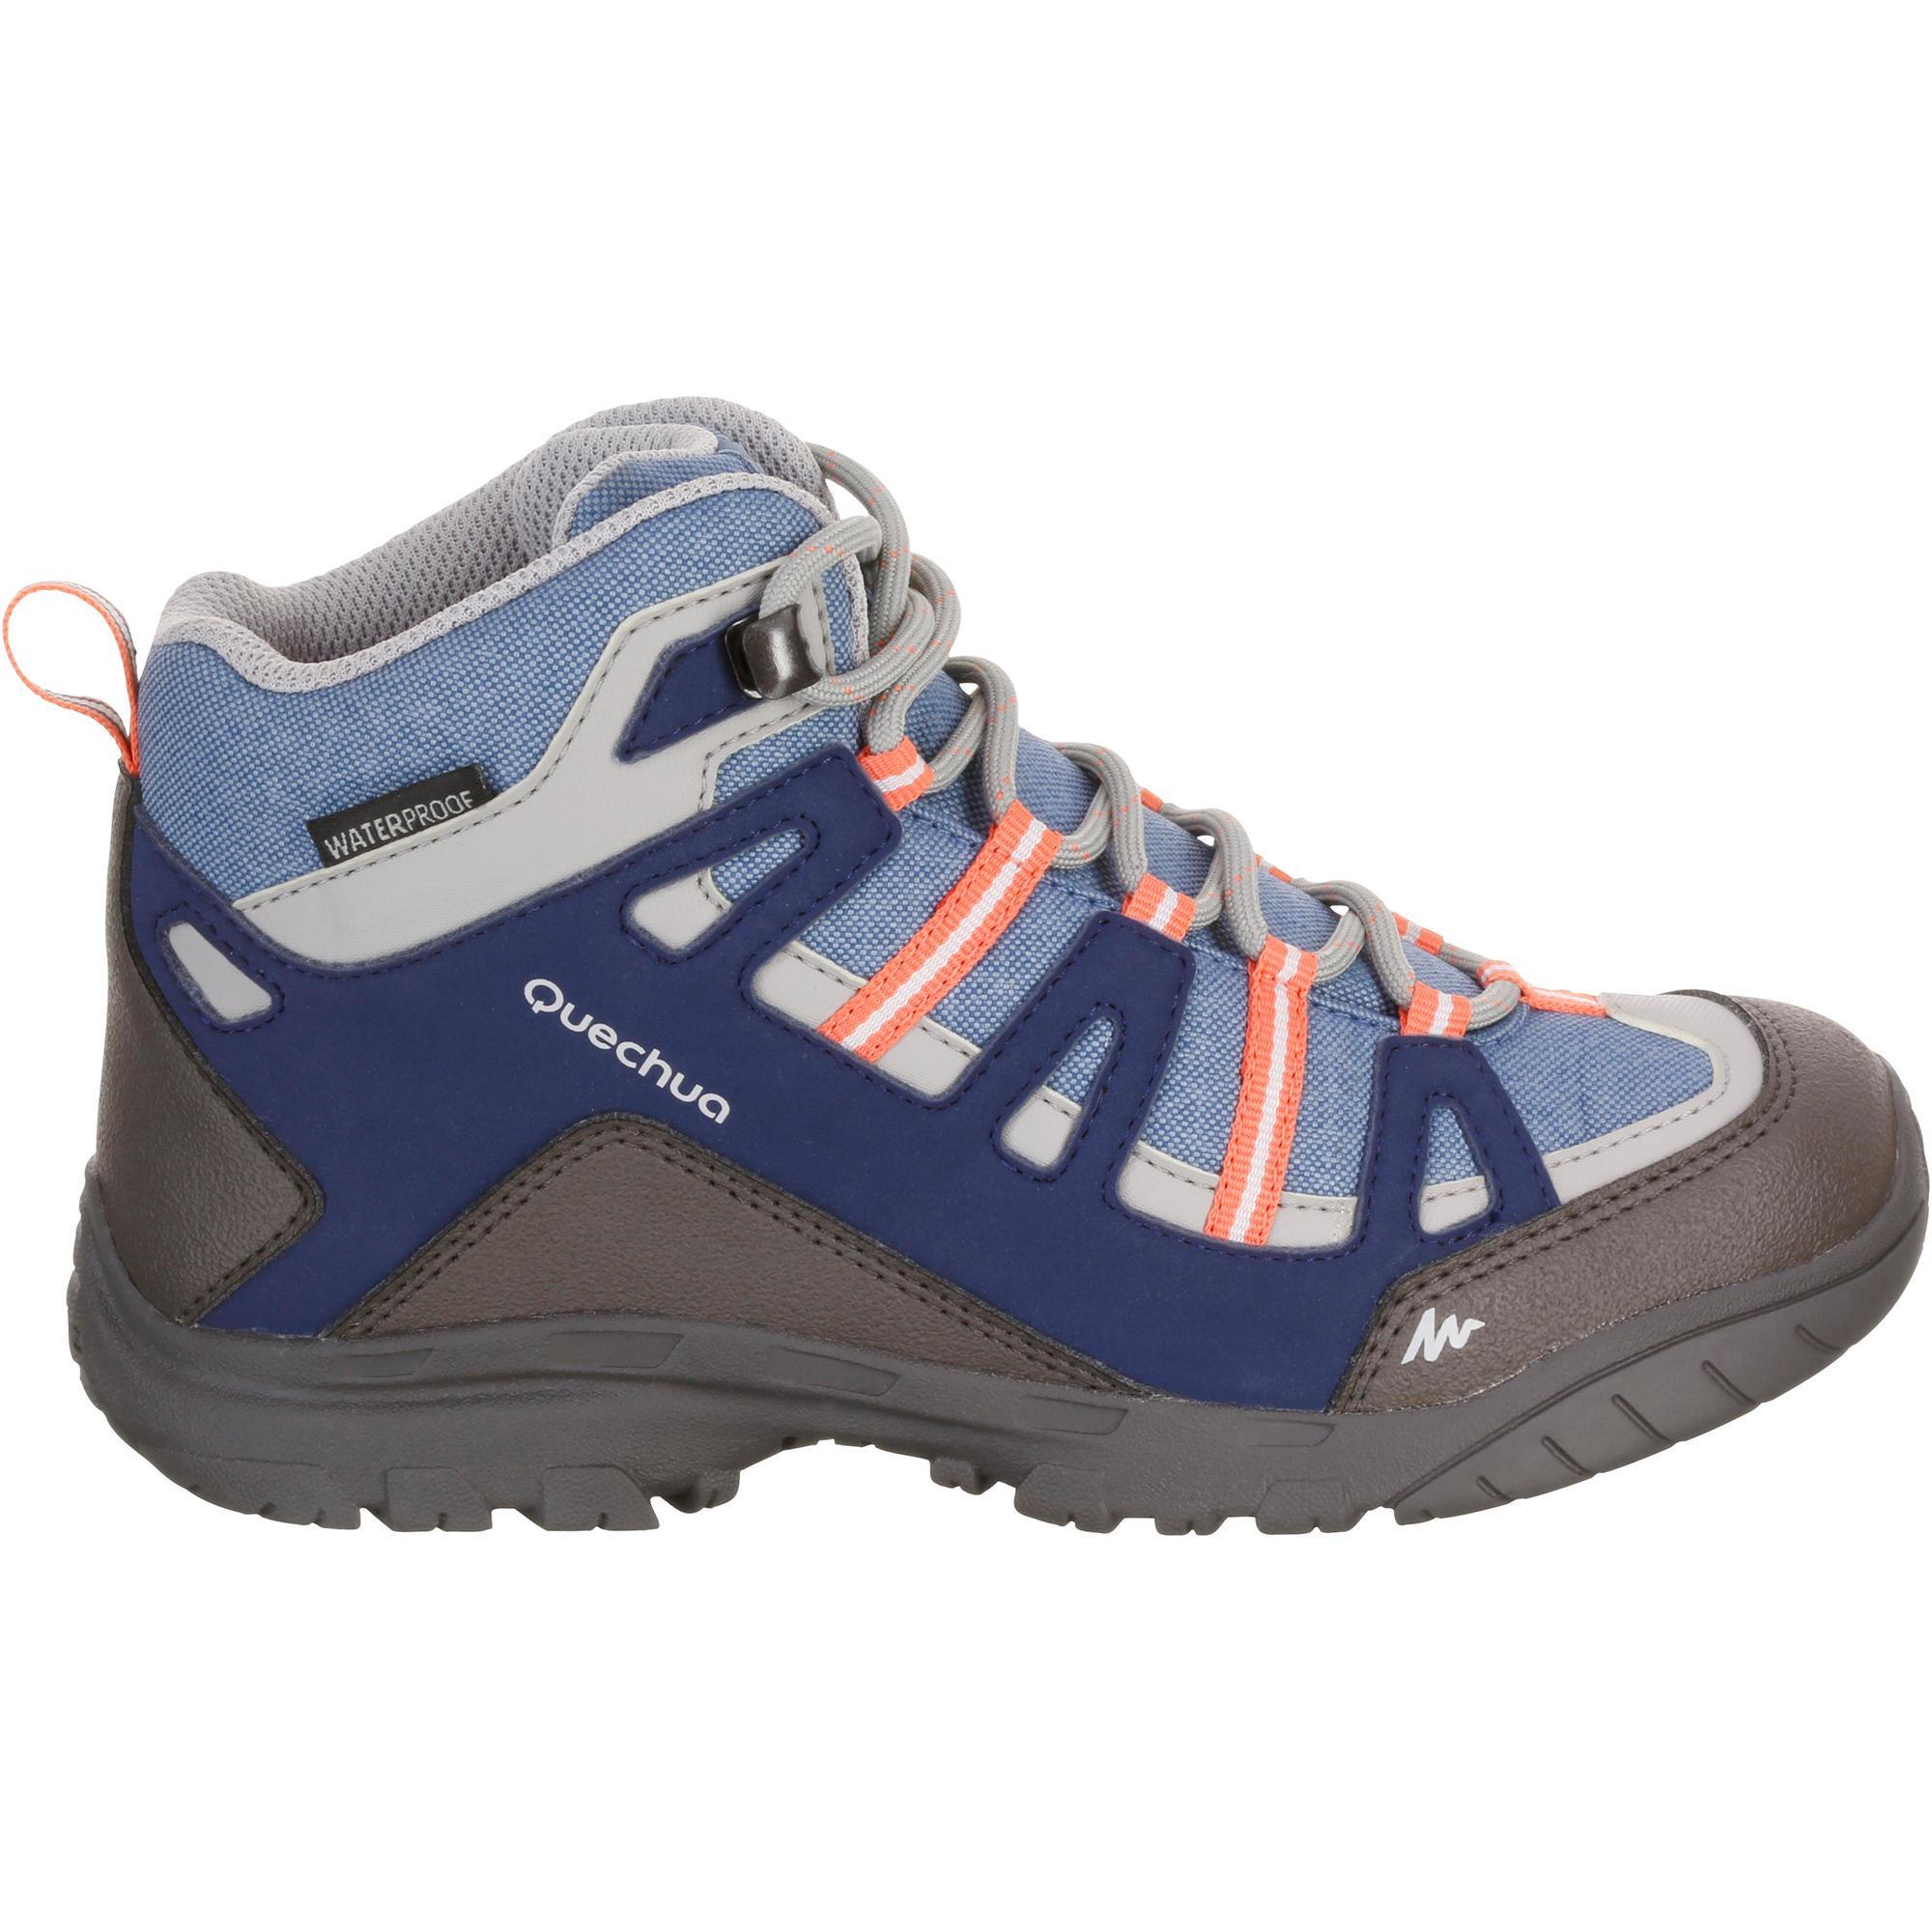 all weather hiking shoes